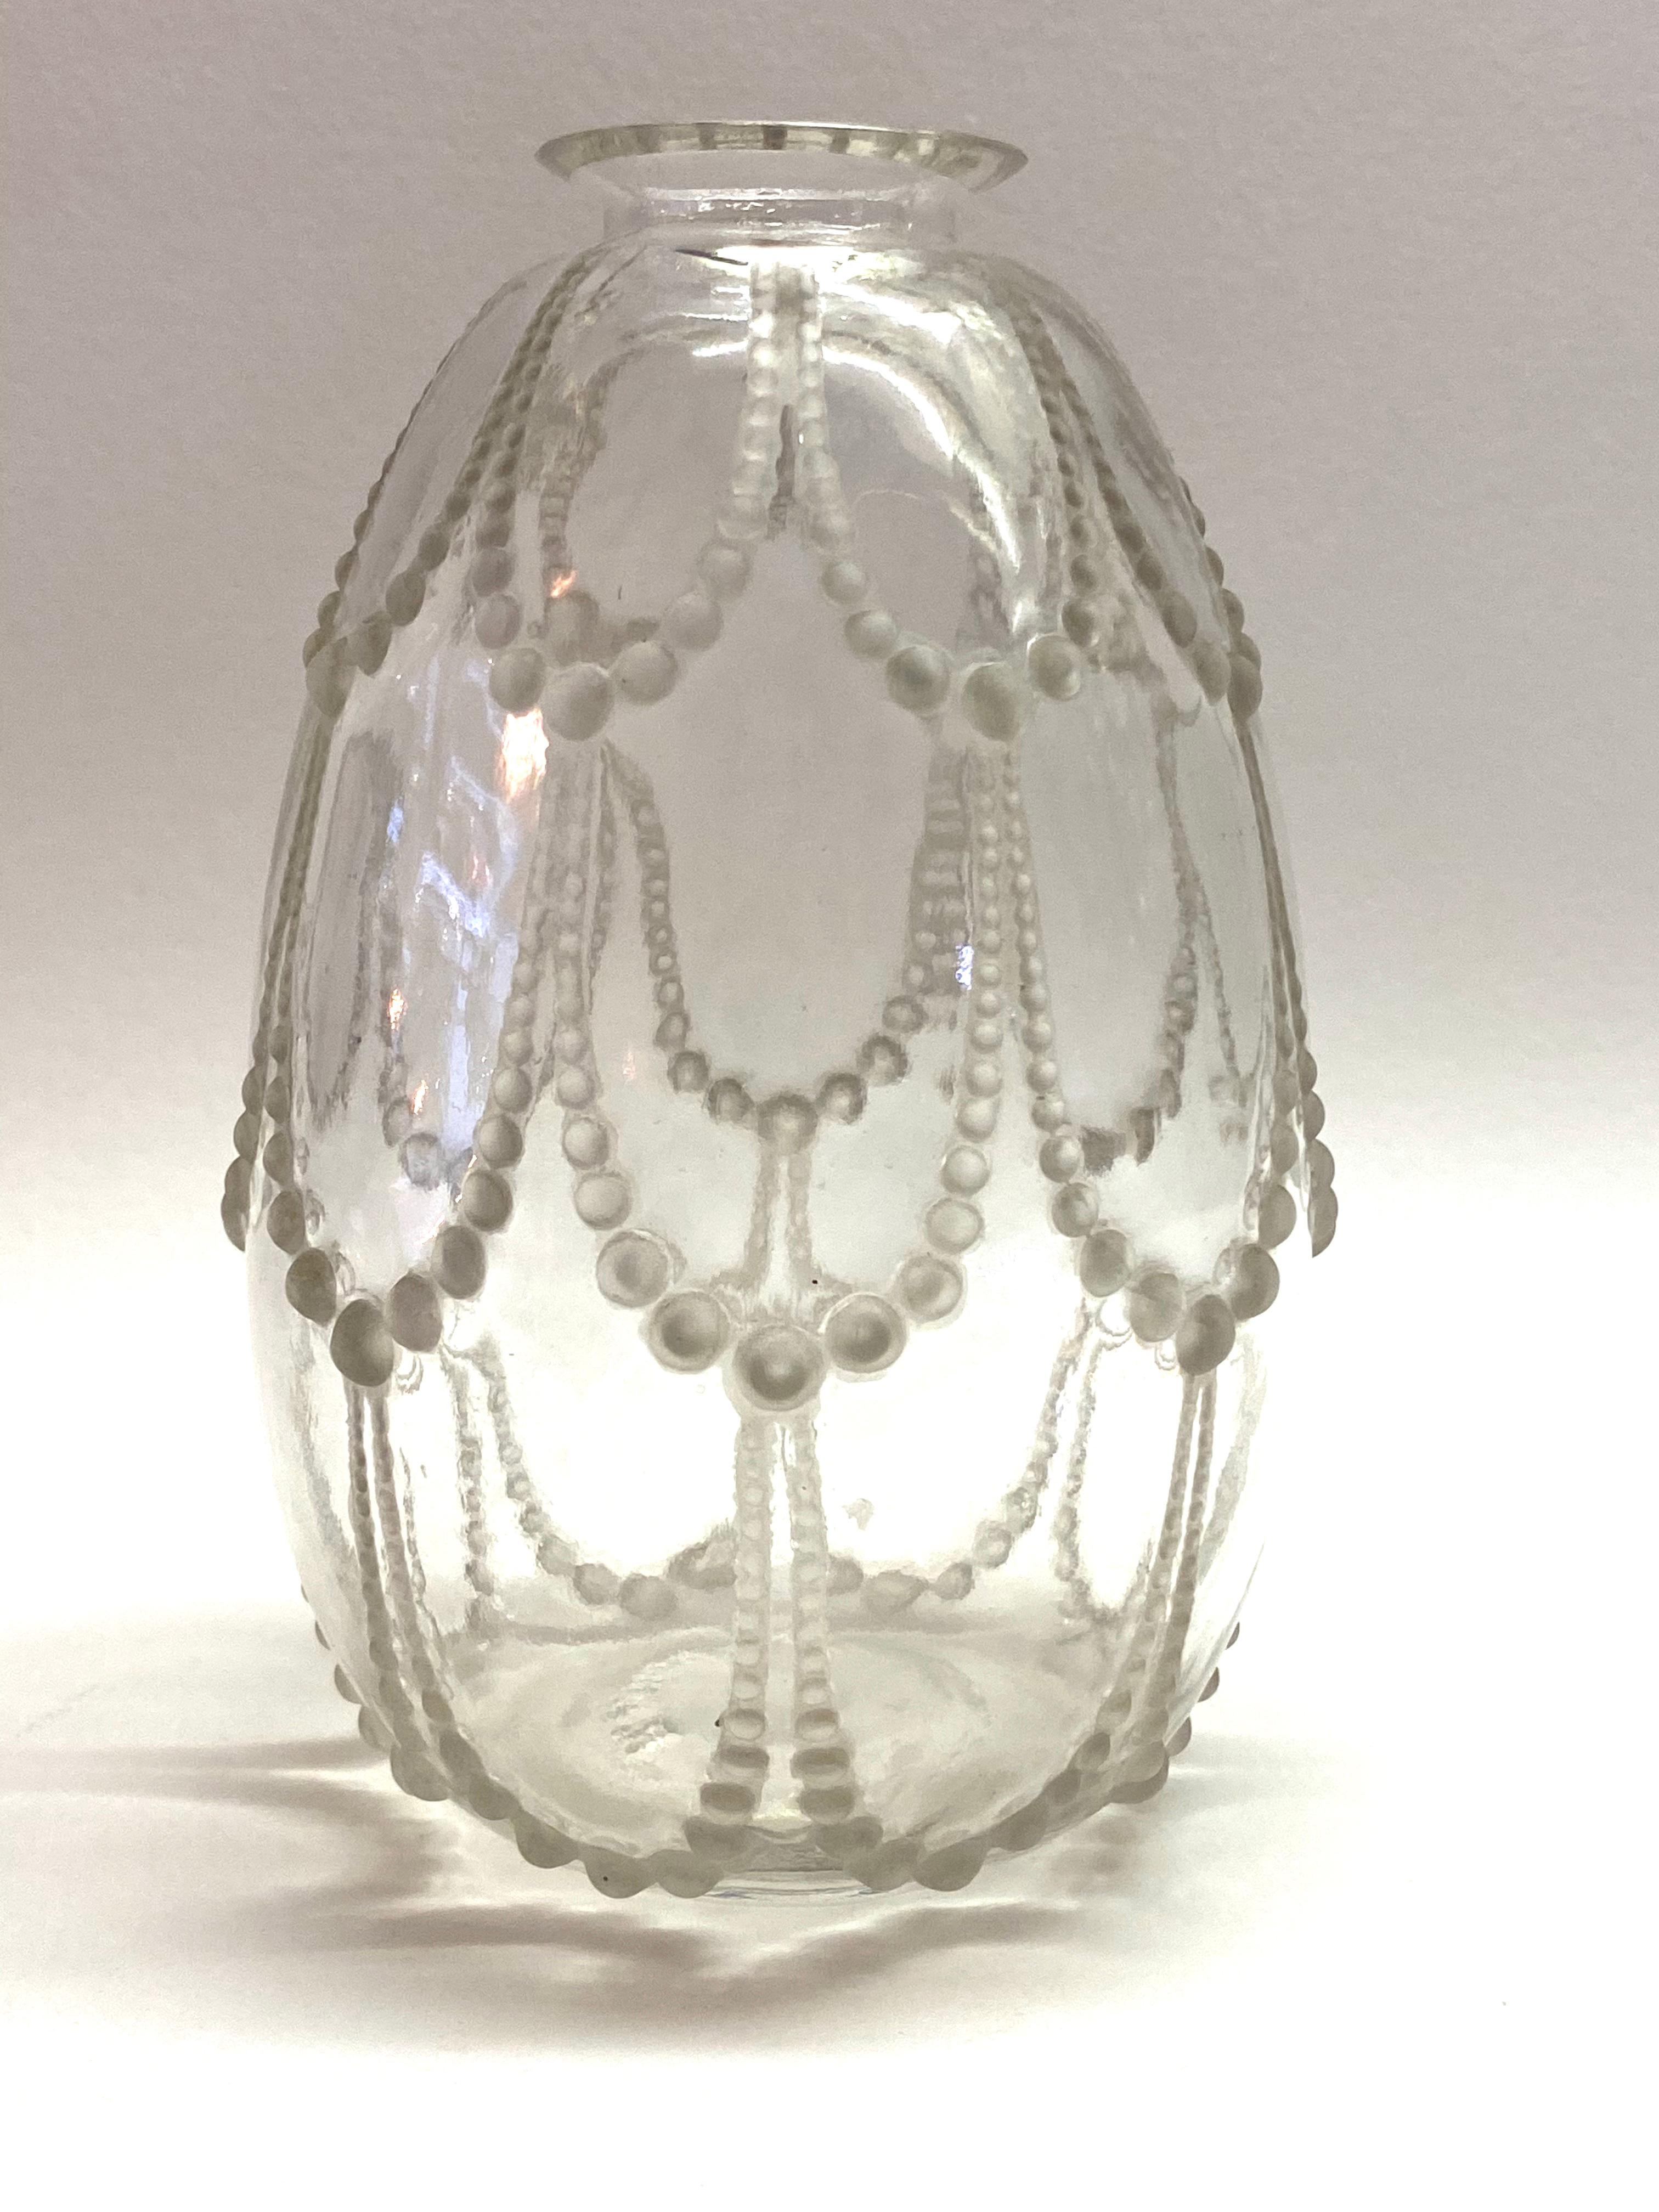 Molded 1925 René Lalique Perles Vase in Clear and Frosted Glass, Pearls